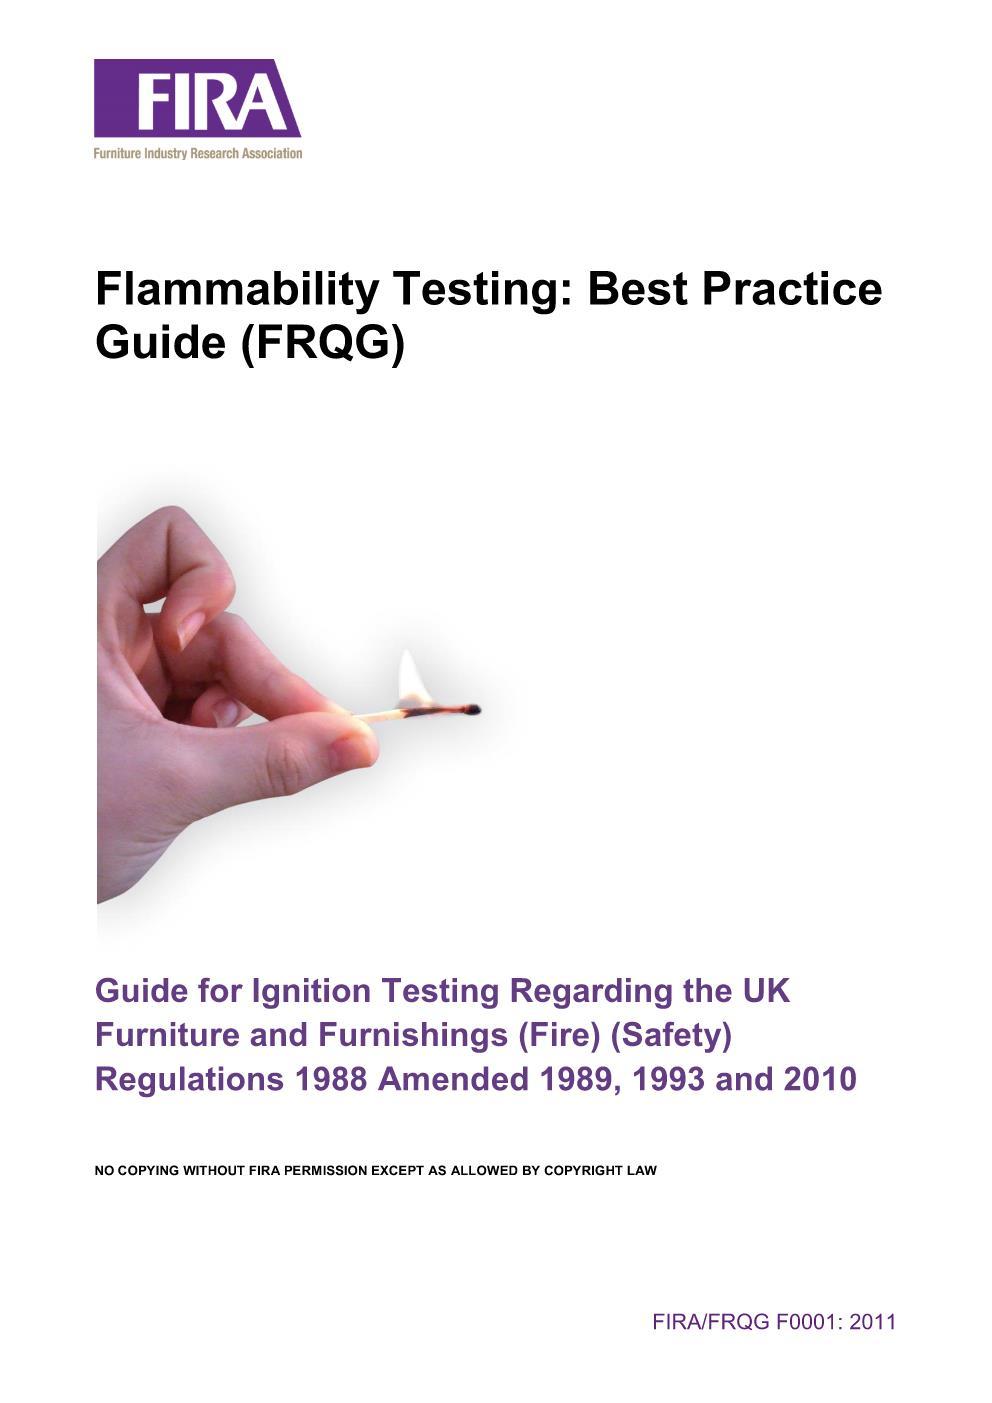 Flammability Testing: Best Practice Guide (FRQG)